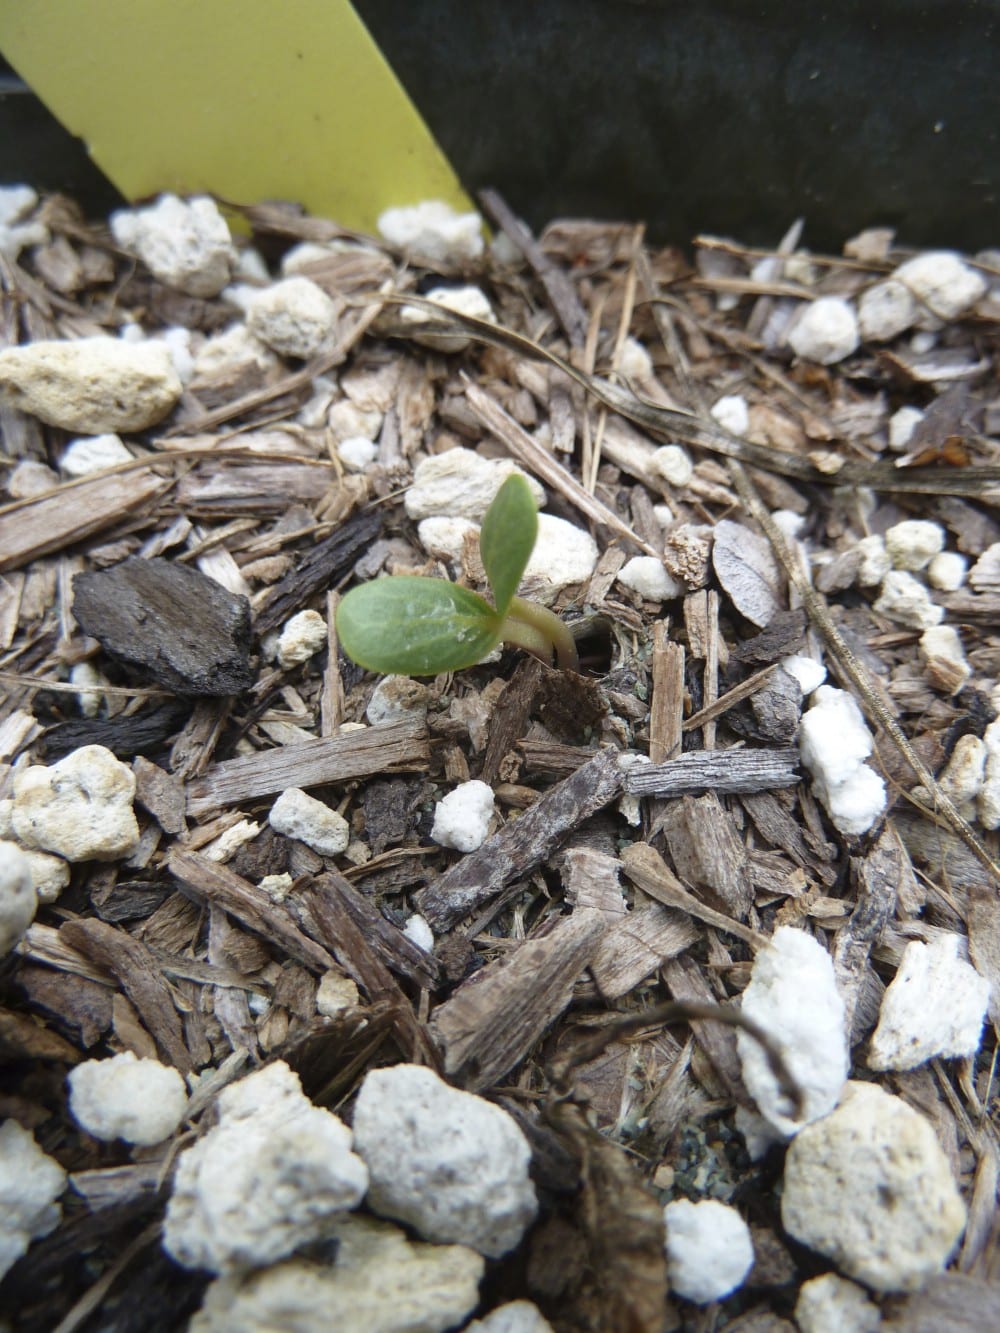 Purple milkweed (Asclepias cordifolia) sprouting in a seed pot.